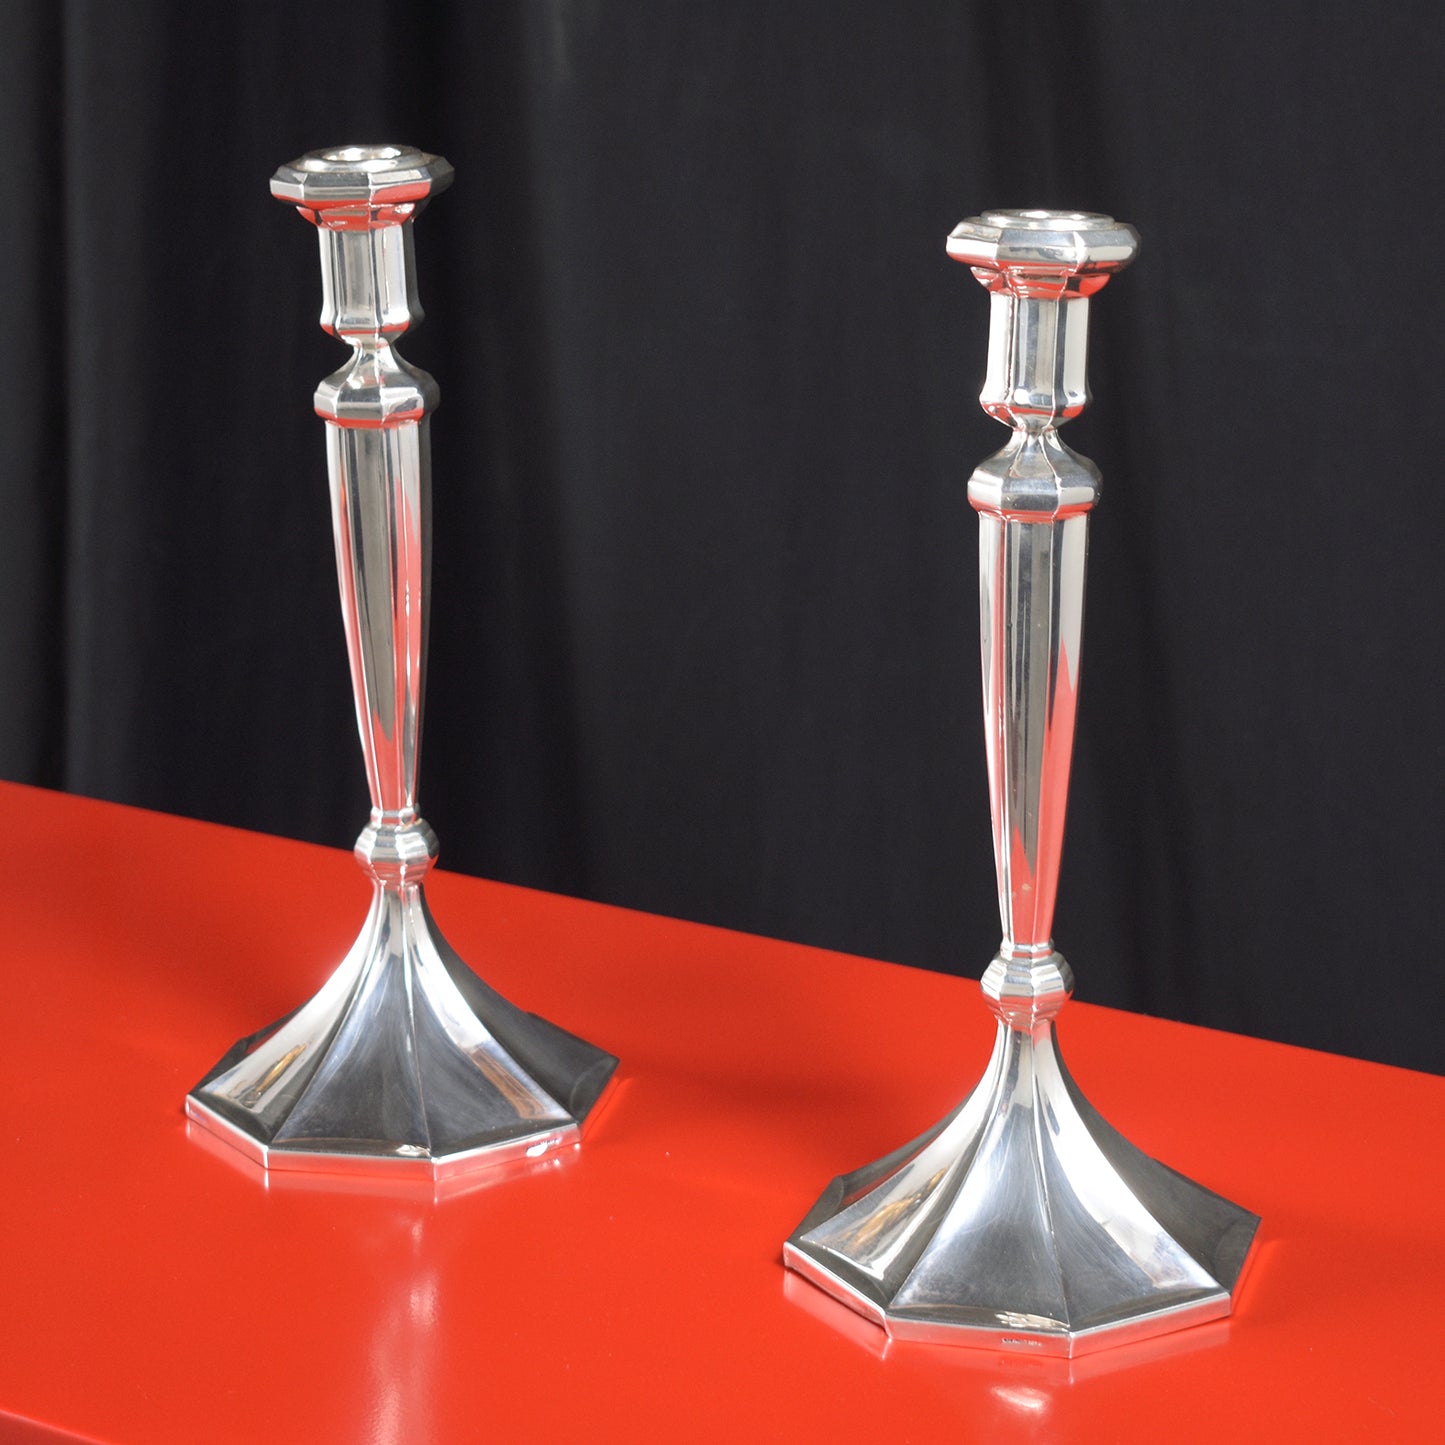 Pair of 925 Sterling Silver Candlesticks